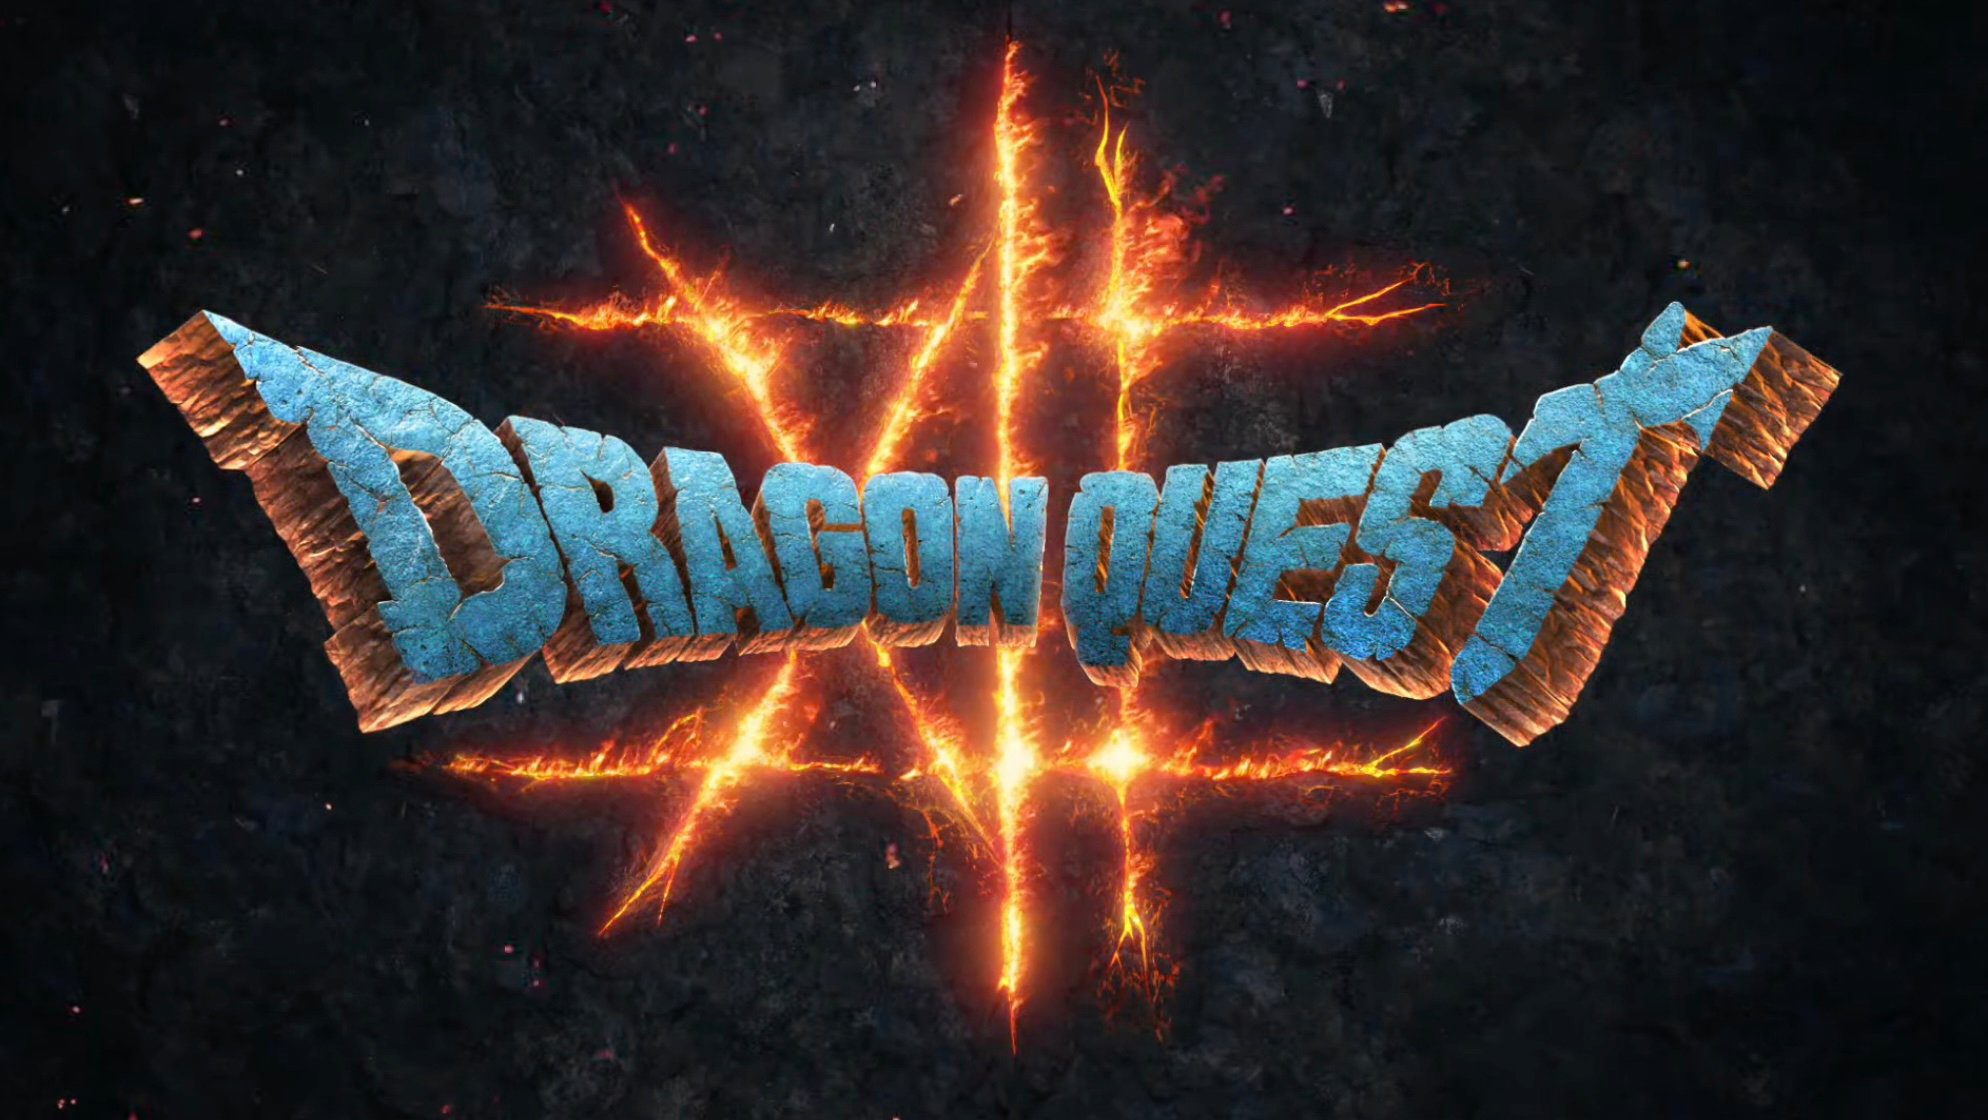 The logo for Dragon Quest XII: The Flames of Fate